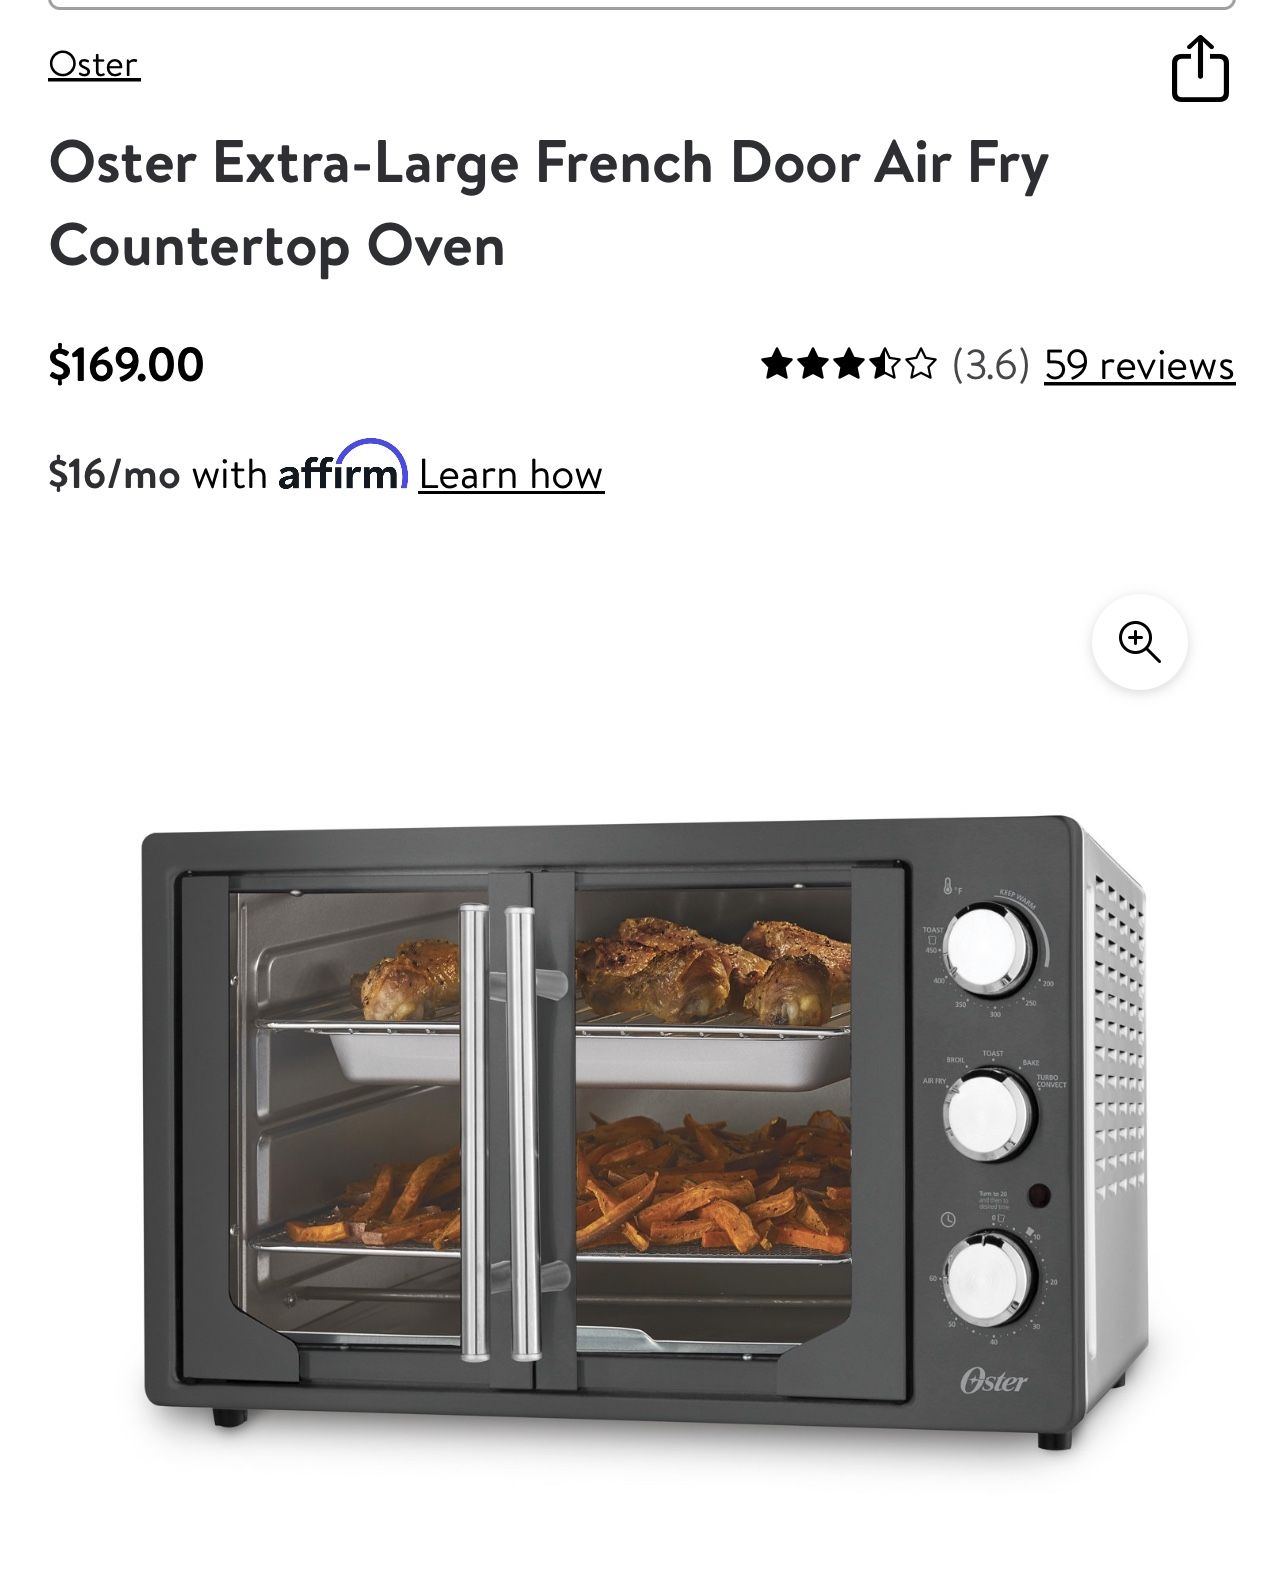 The Oster Extra-Large French Door Air Fry Countertop Toaster Oven